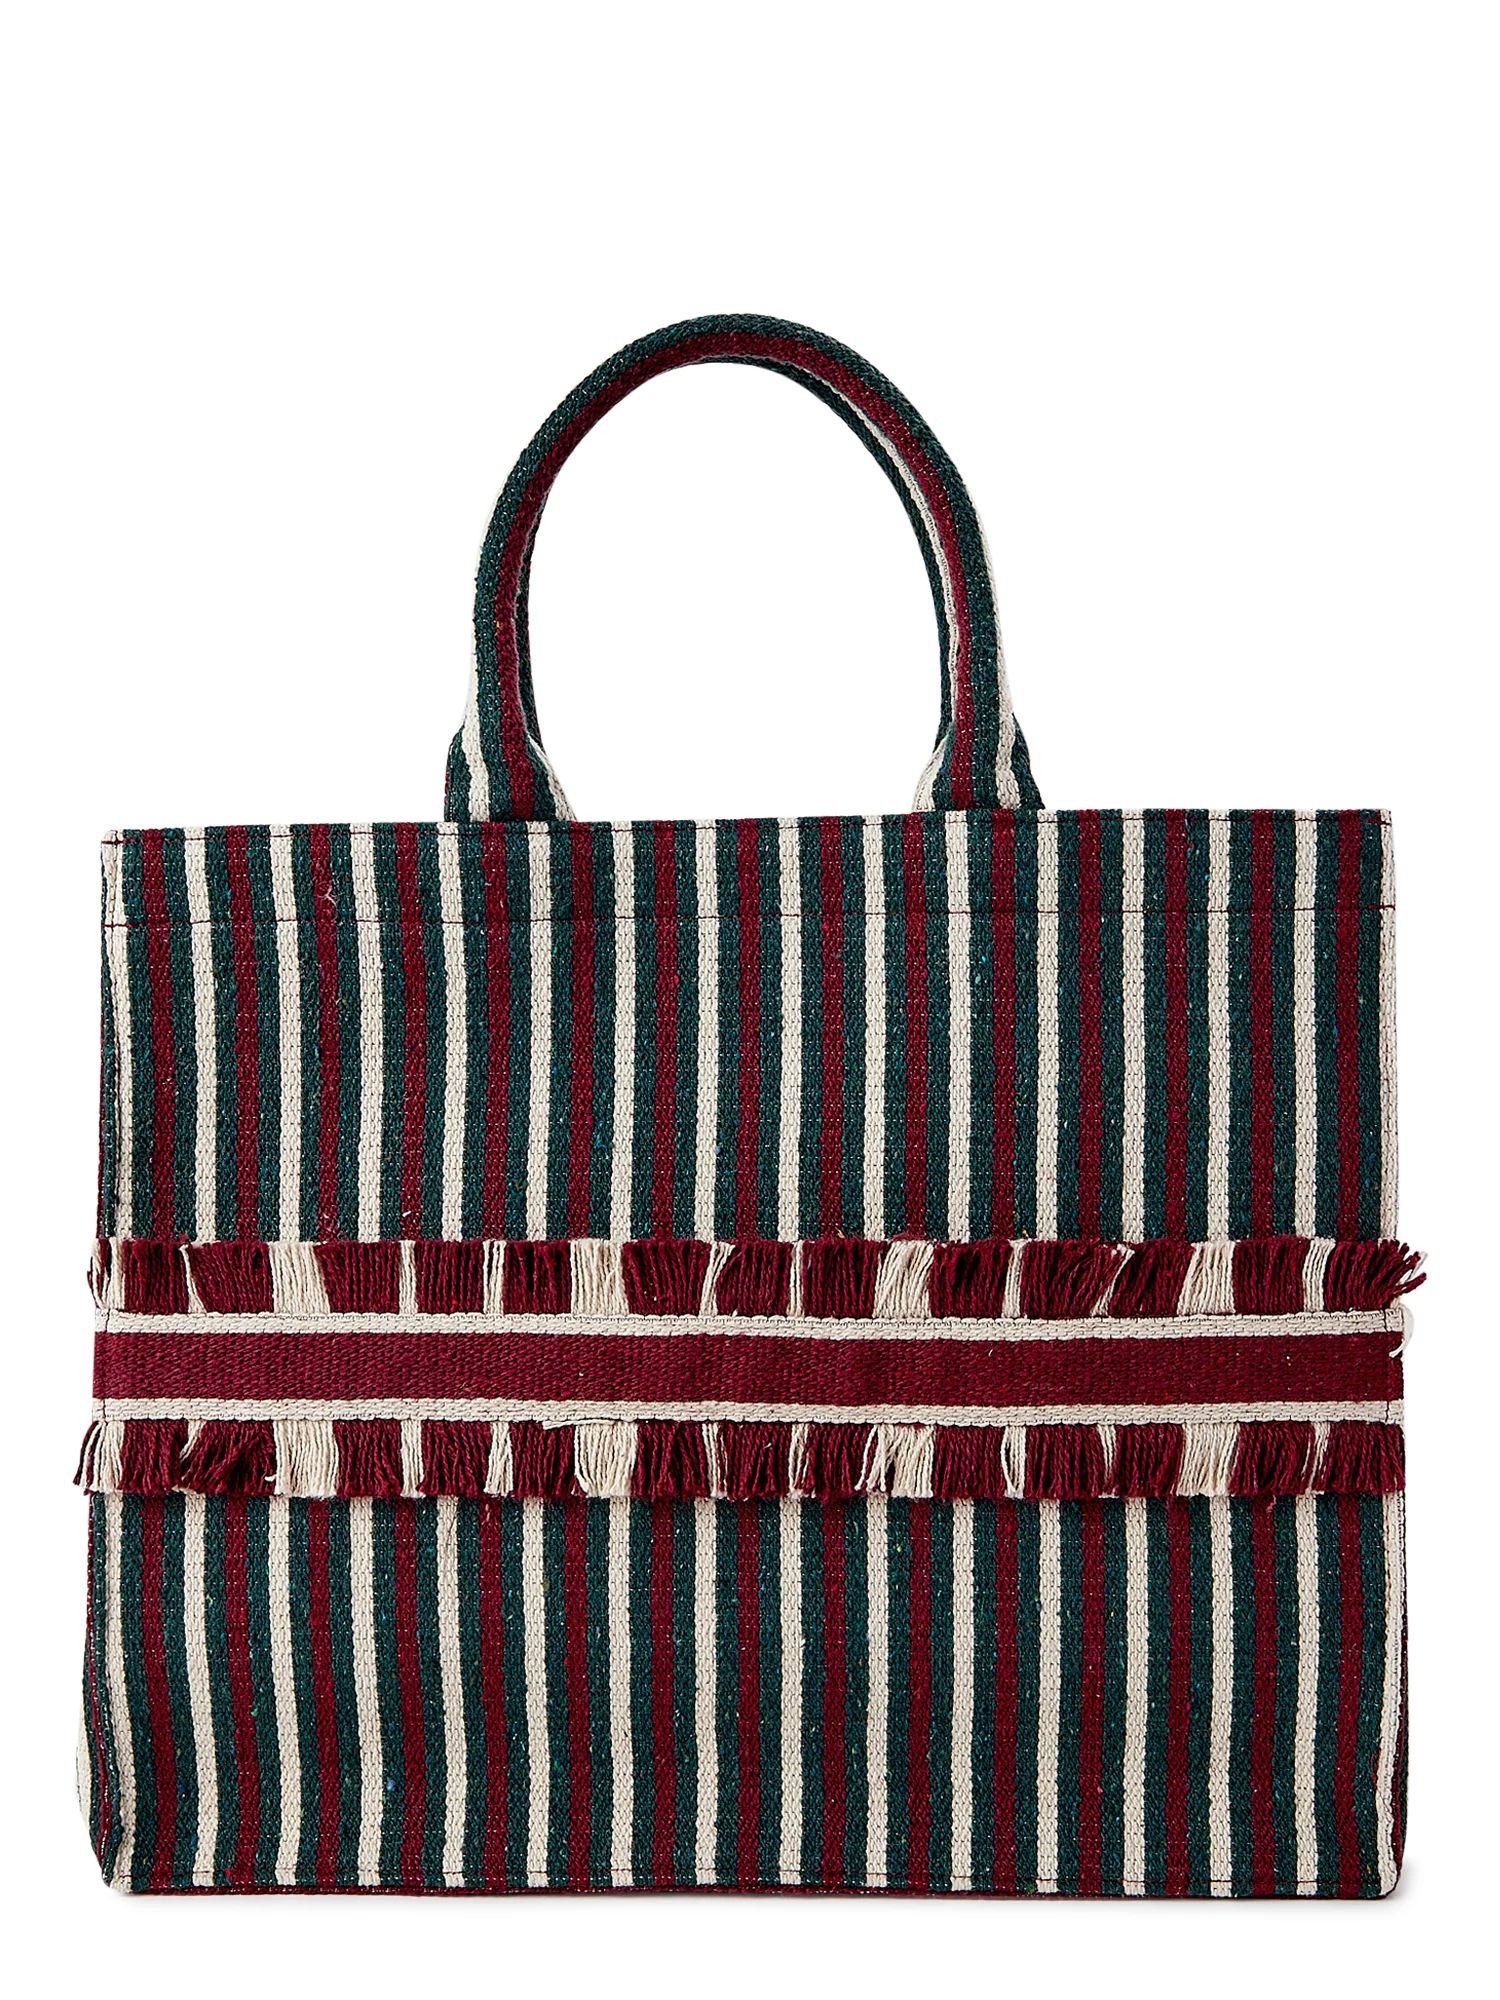 Time and Tru Women's Large Woven Tote Bag Green Burgundy | Walmart (US)